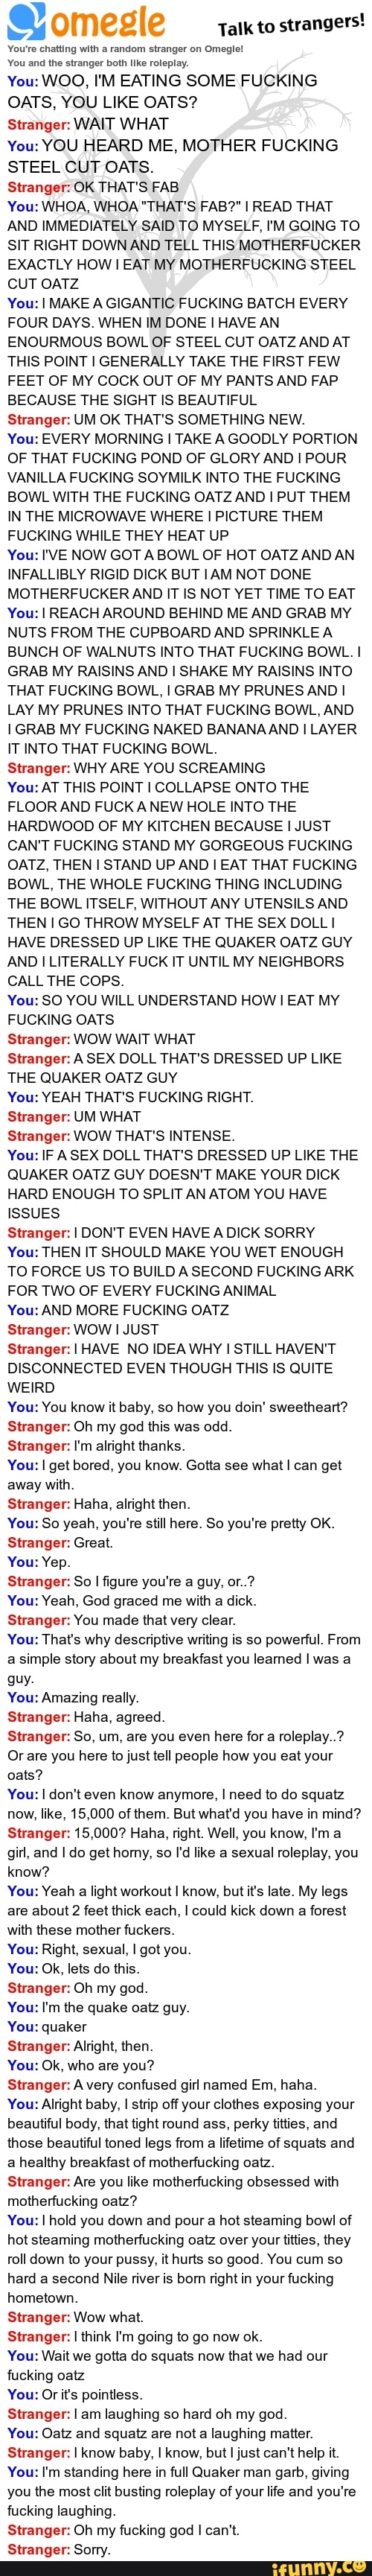 With strangers randomly forum chat omegle Father alarmed